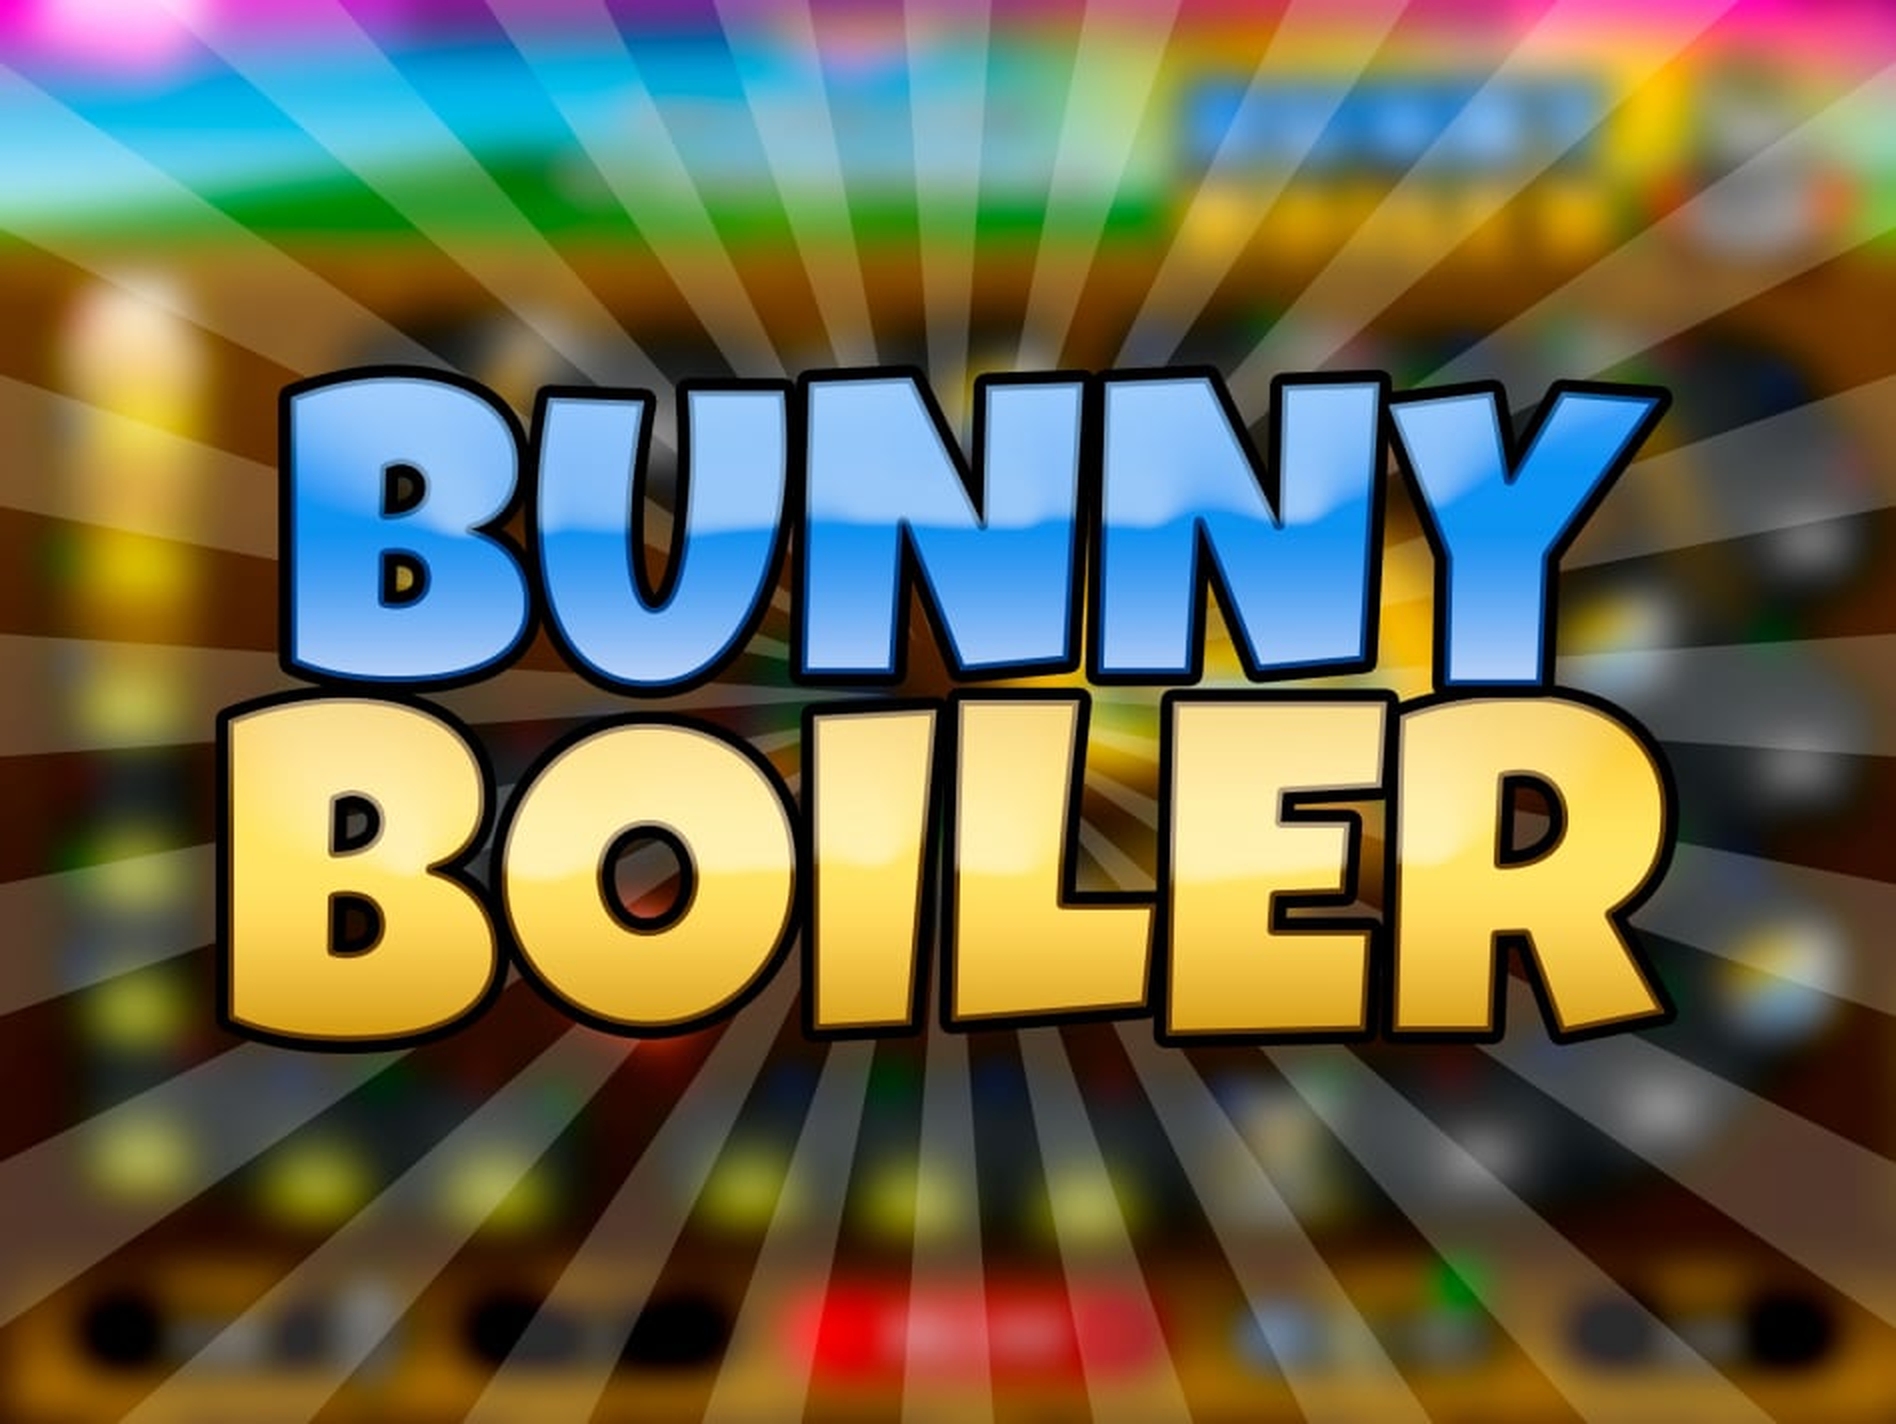 The Bunny Boiler Online Slot Demo Game by Microgaming